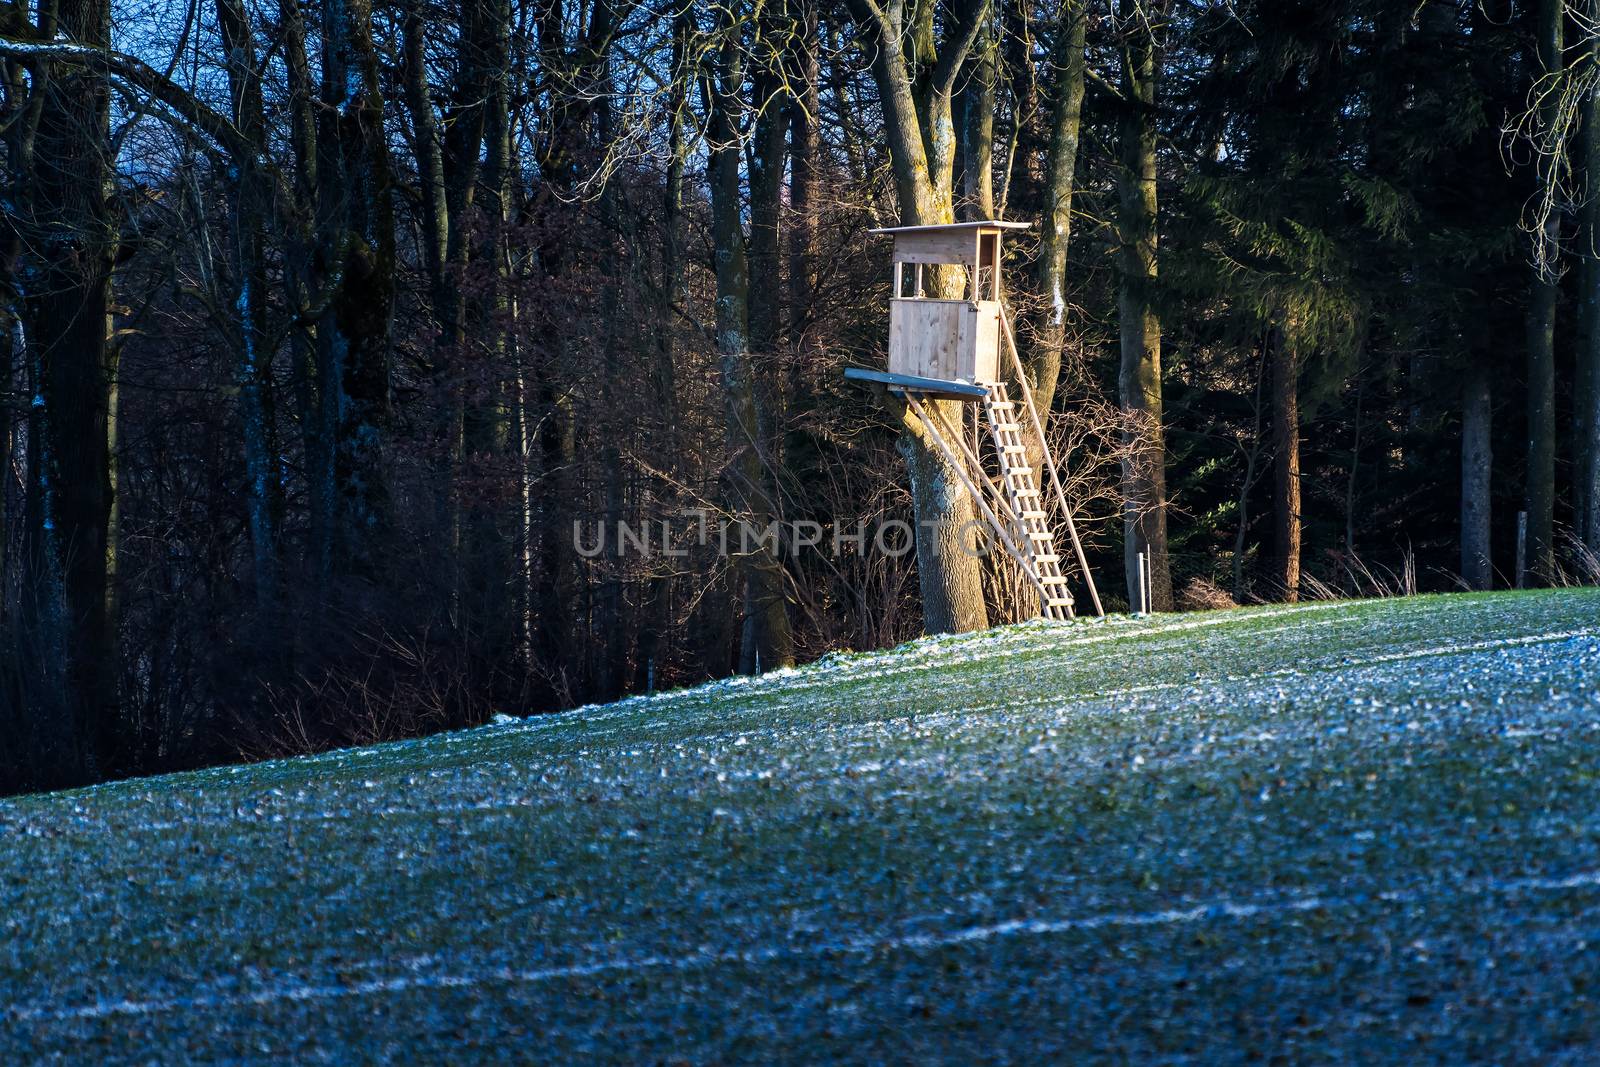 Deerstand with field and forest in Bavaria, Germany in winter by w20er